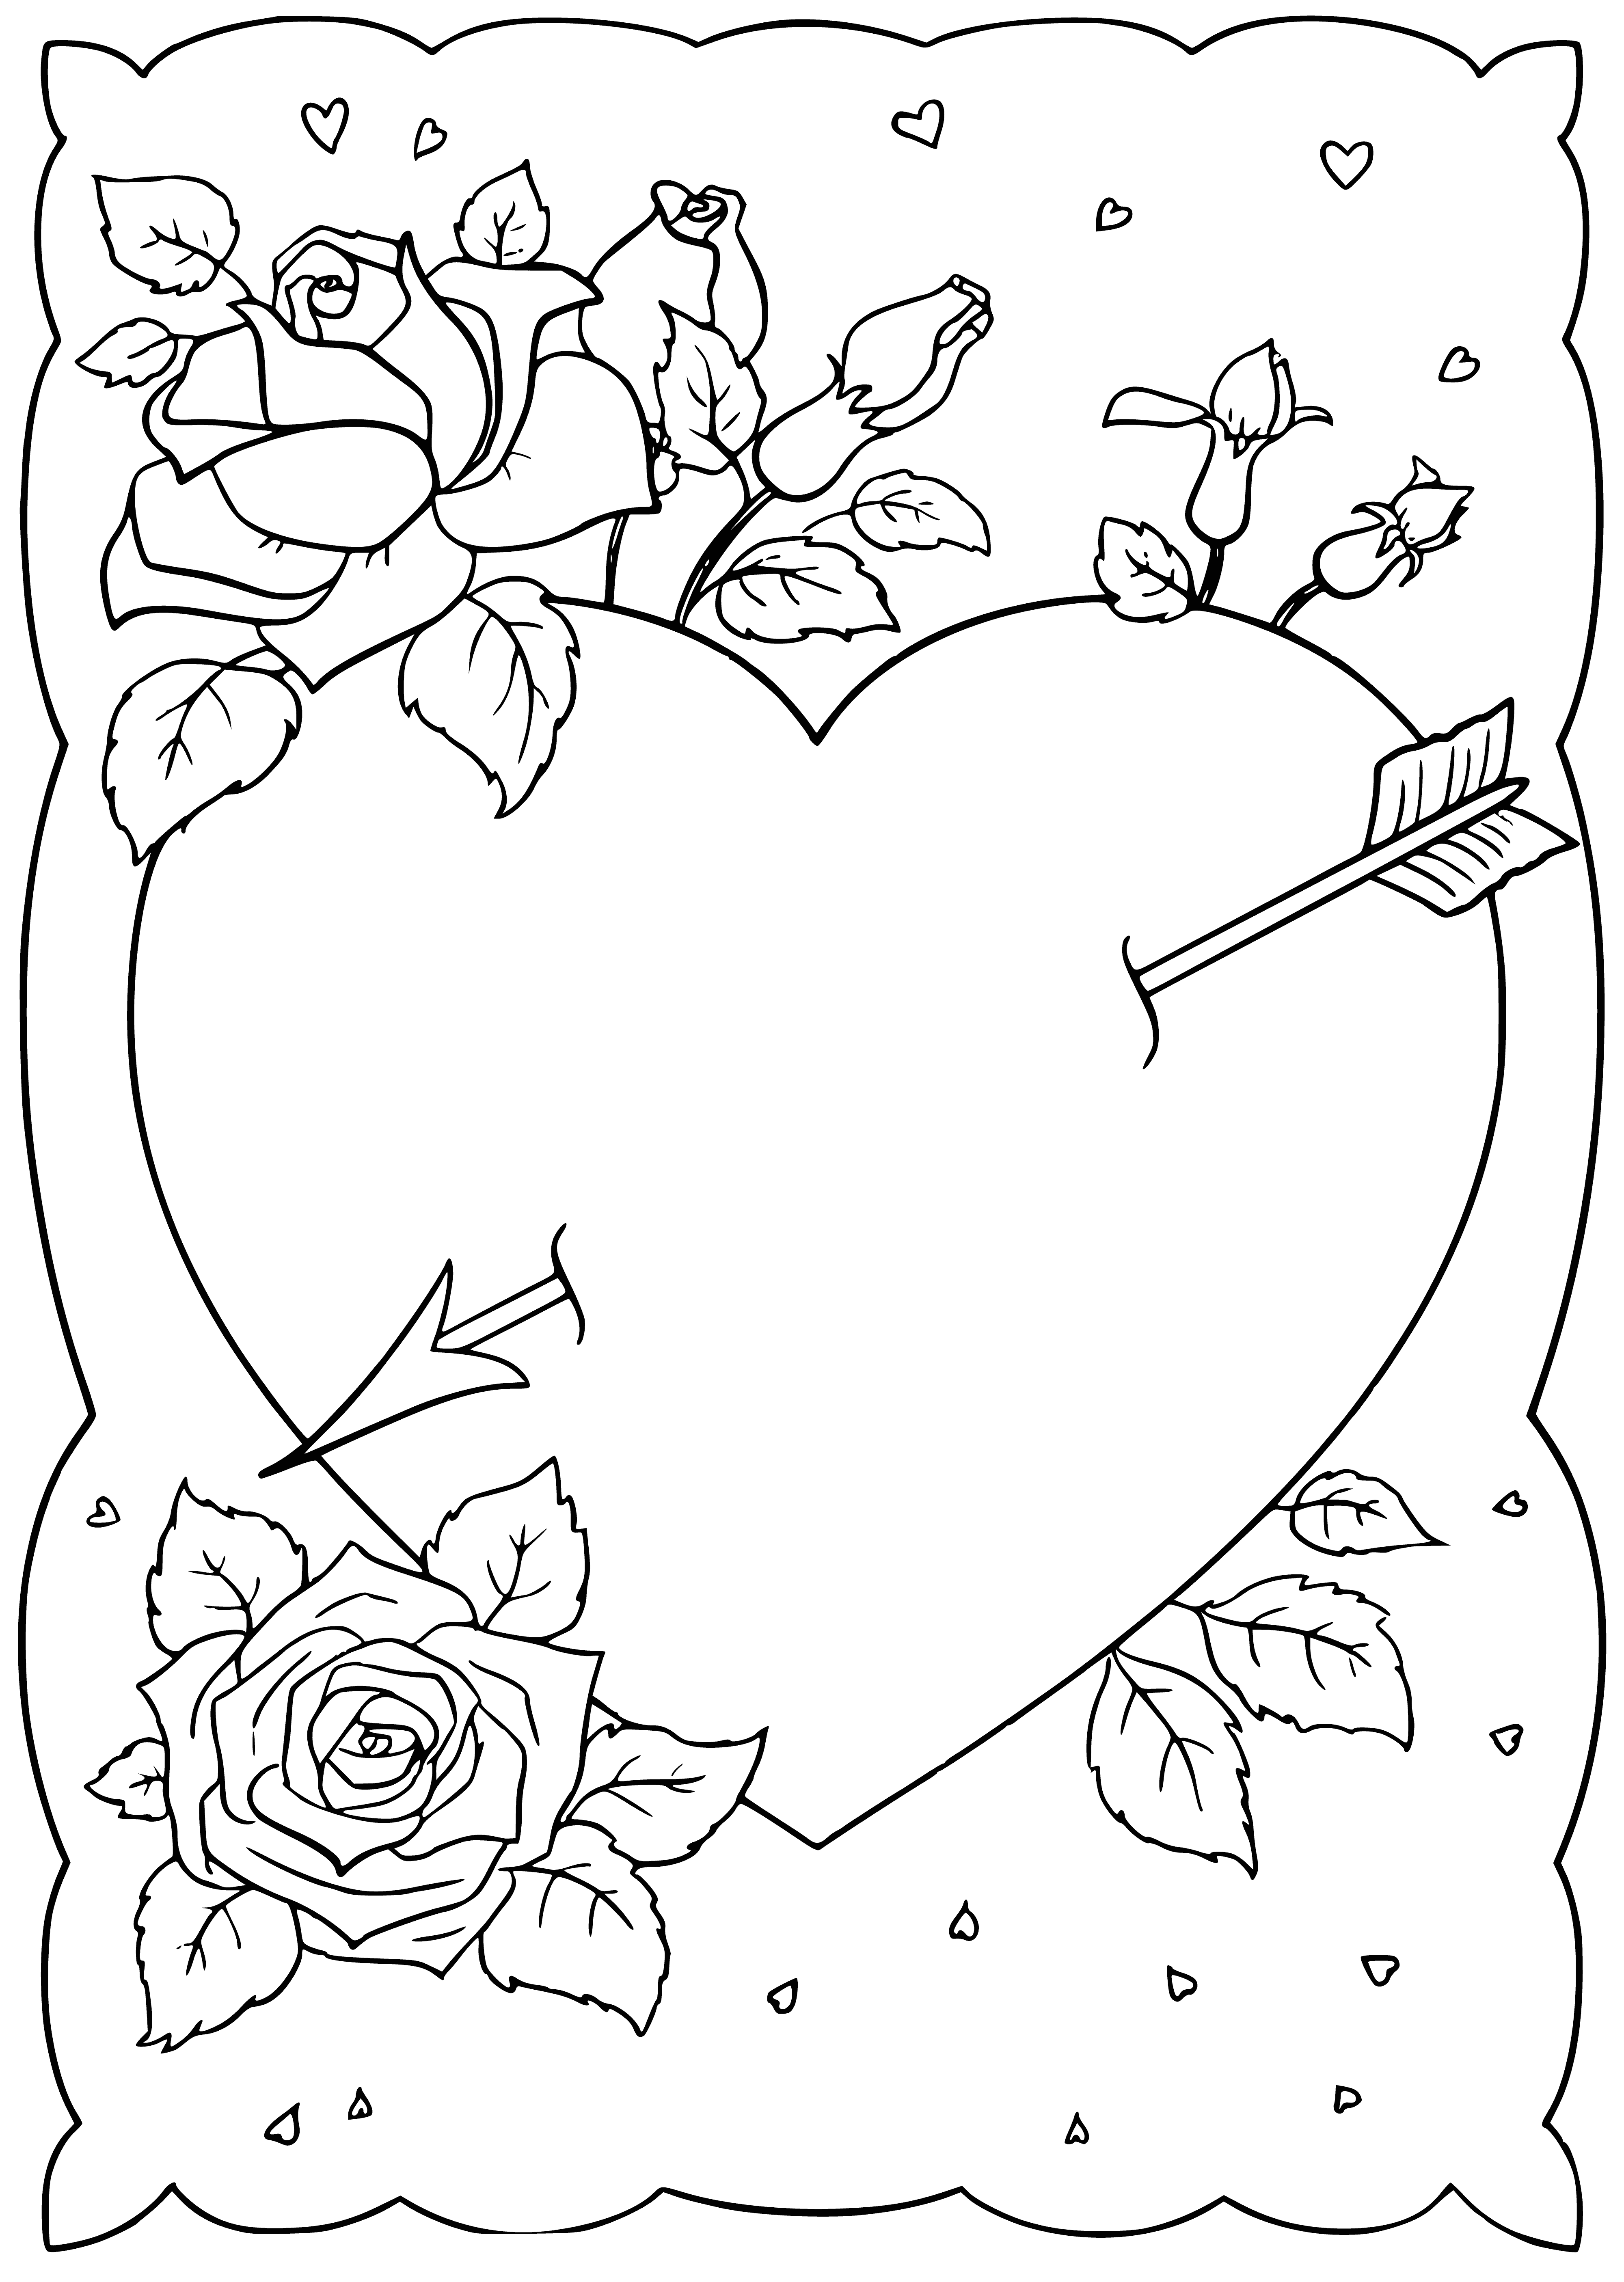 Card coloring page